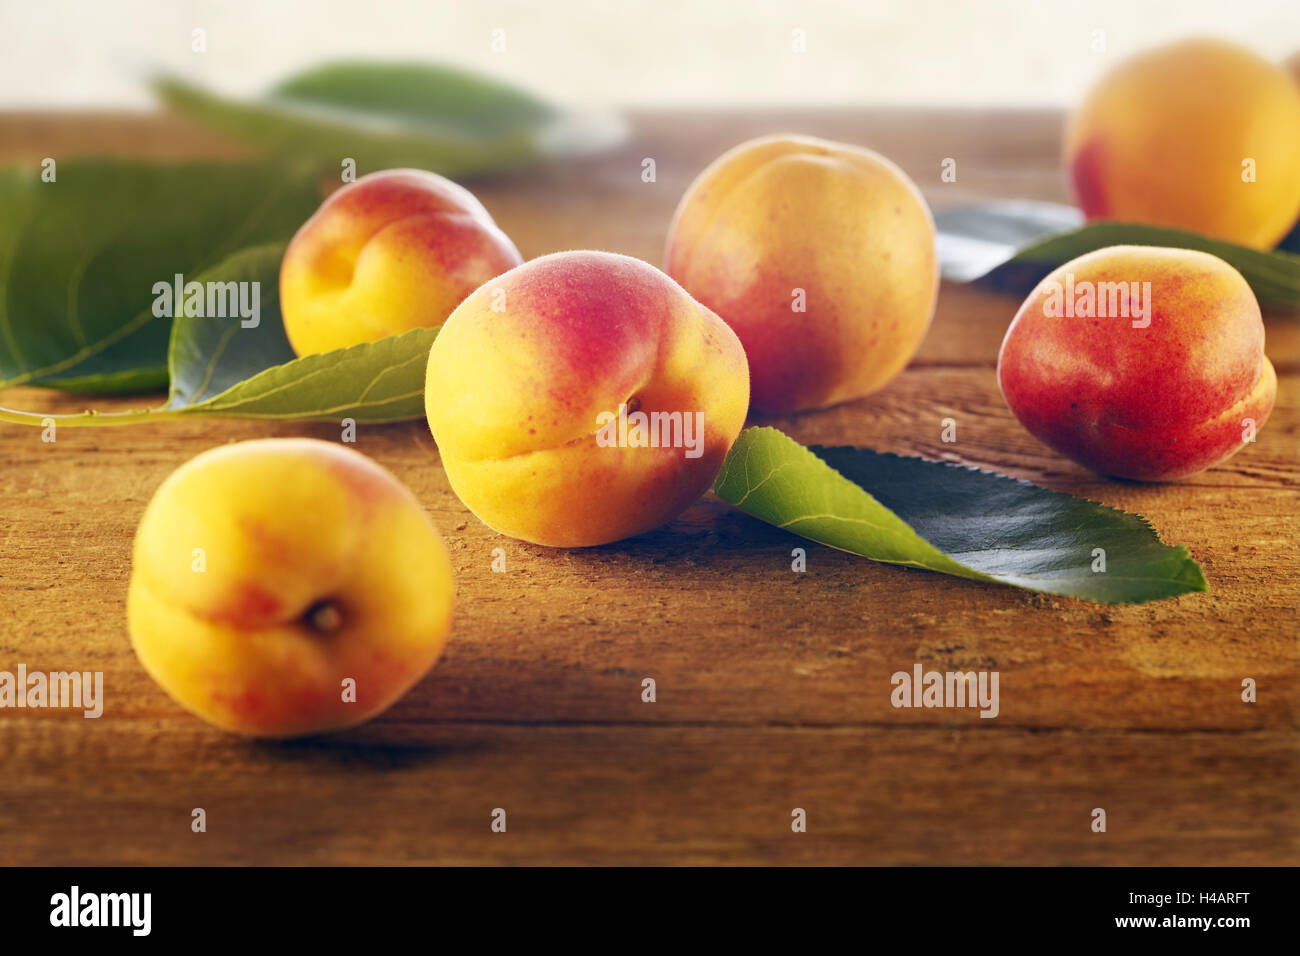 Apricots, yellow, red, wooden table, harvest, autumn, Stock Photo